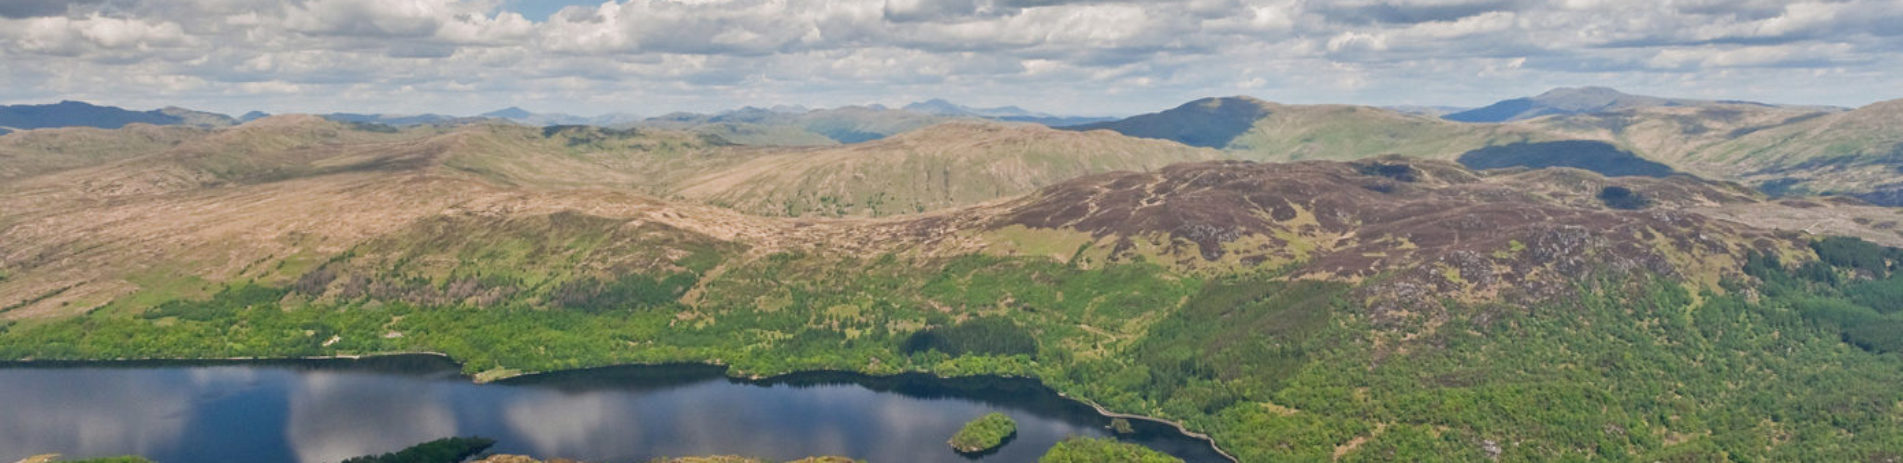 view-of-loch-katrine-and-largely-forested-trossachs-mountains-from-summit-of-ben-venue